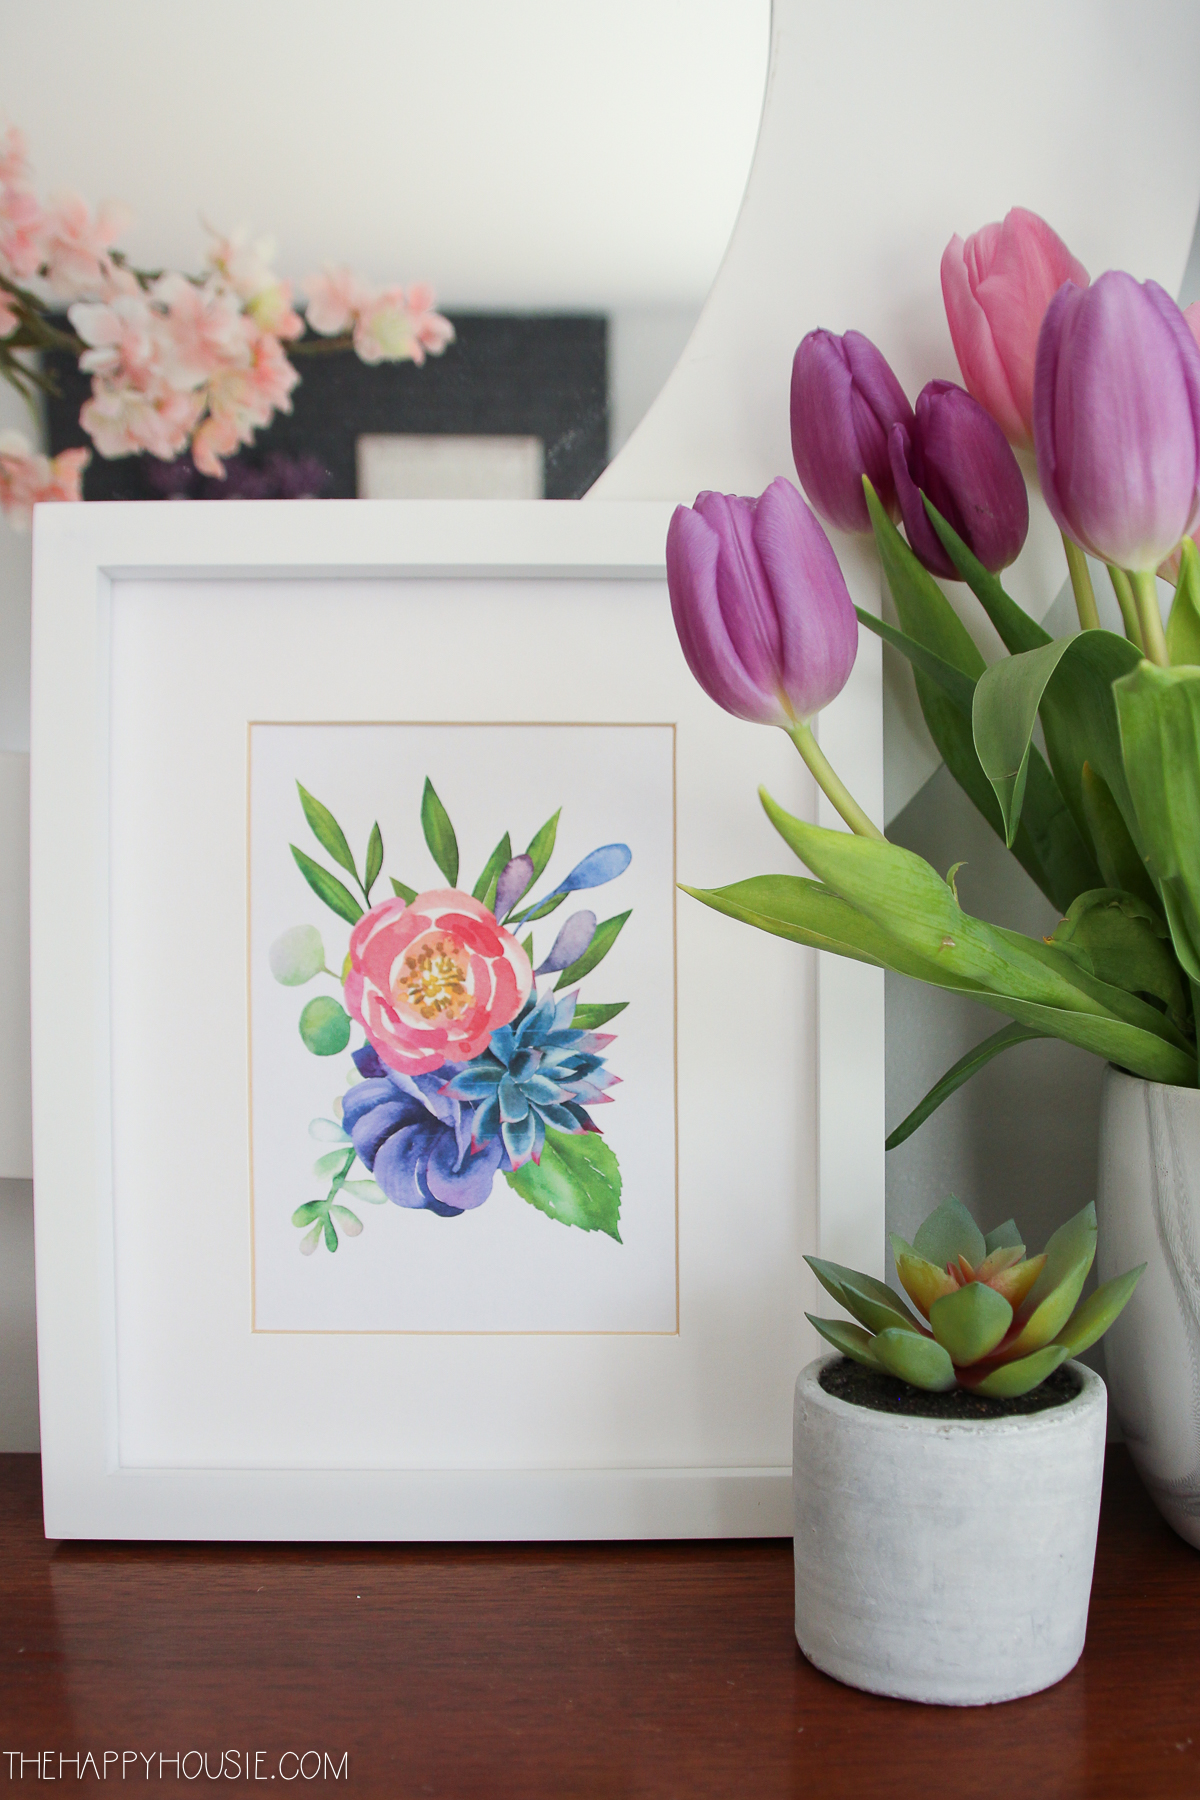 Floral watercolor beside a vase full of tulips.